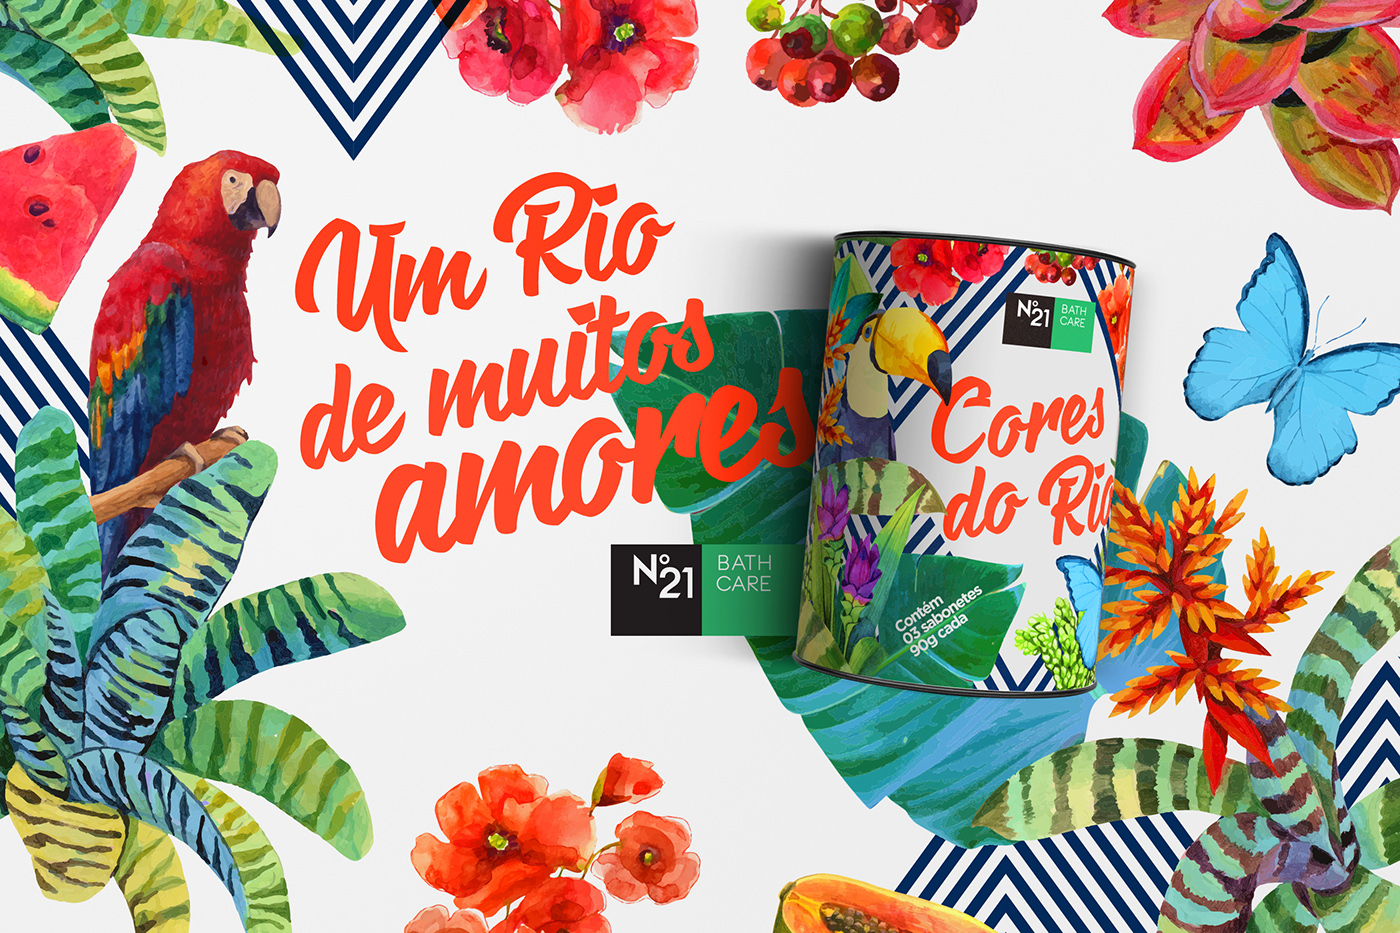 rio soap Brazil Tropical plants Nature natural flower body Cosmetic Health SHOWER brand logo colorful